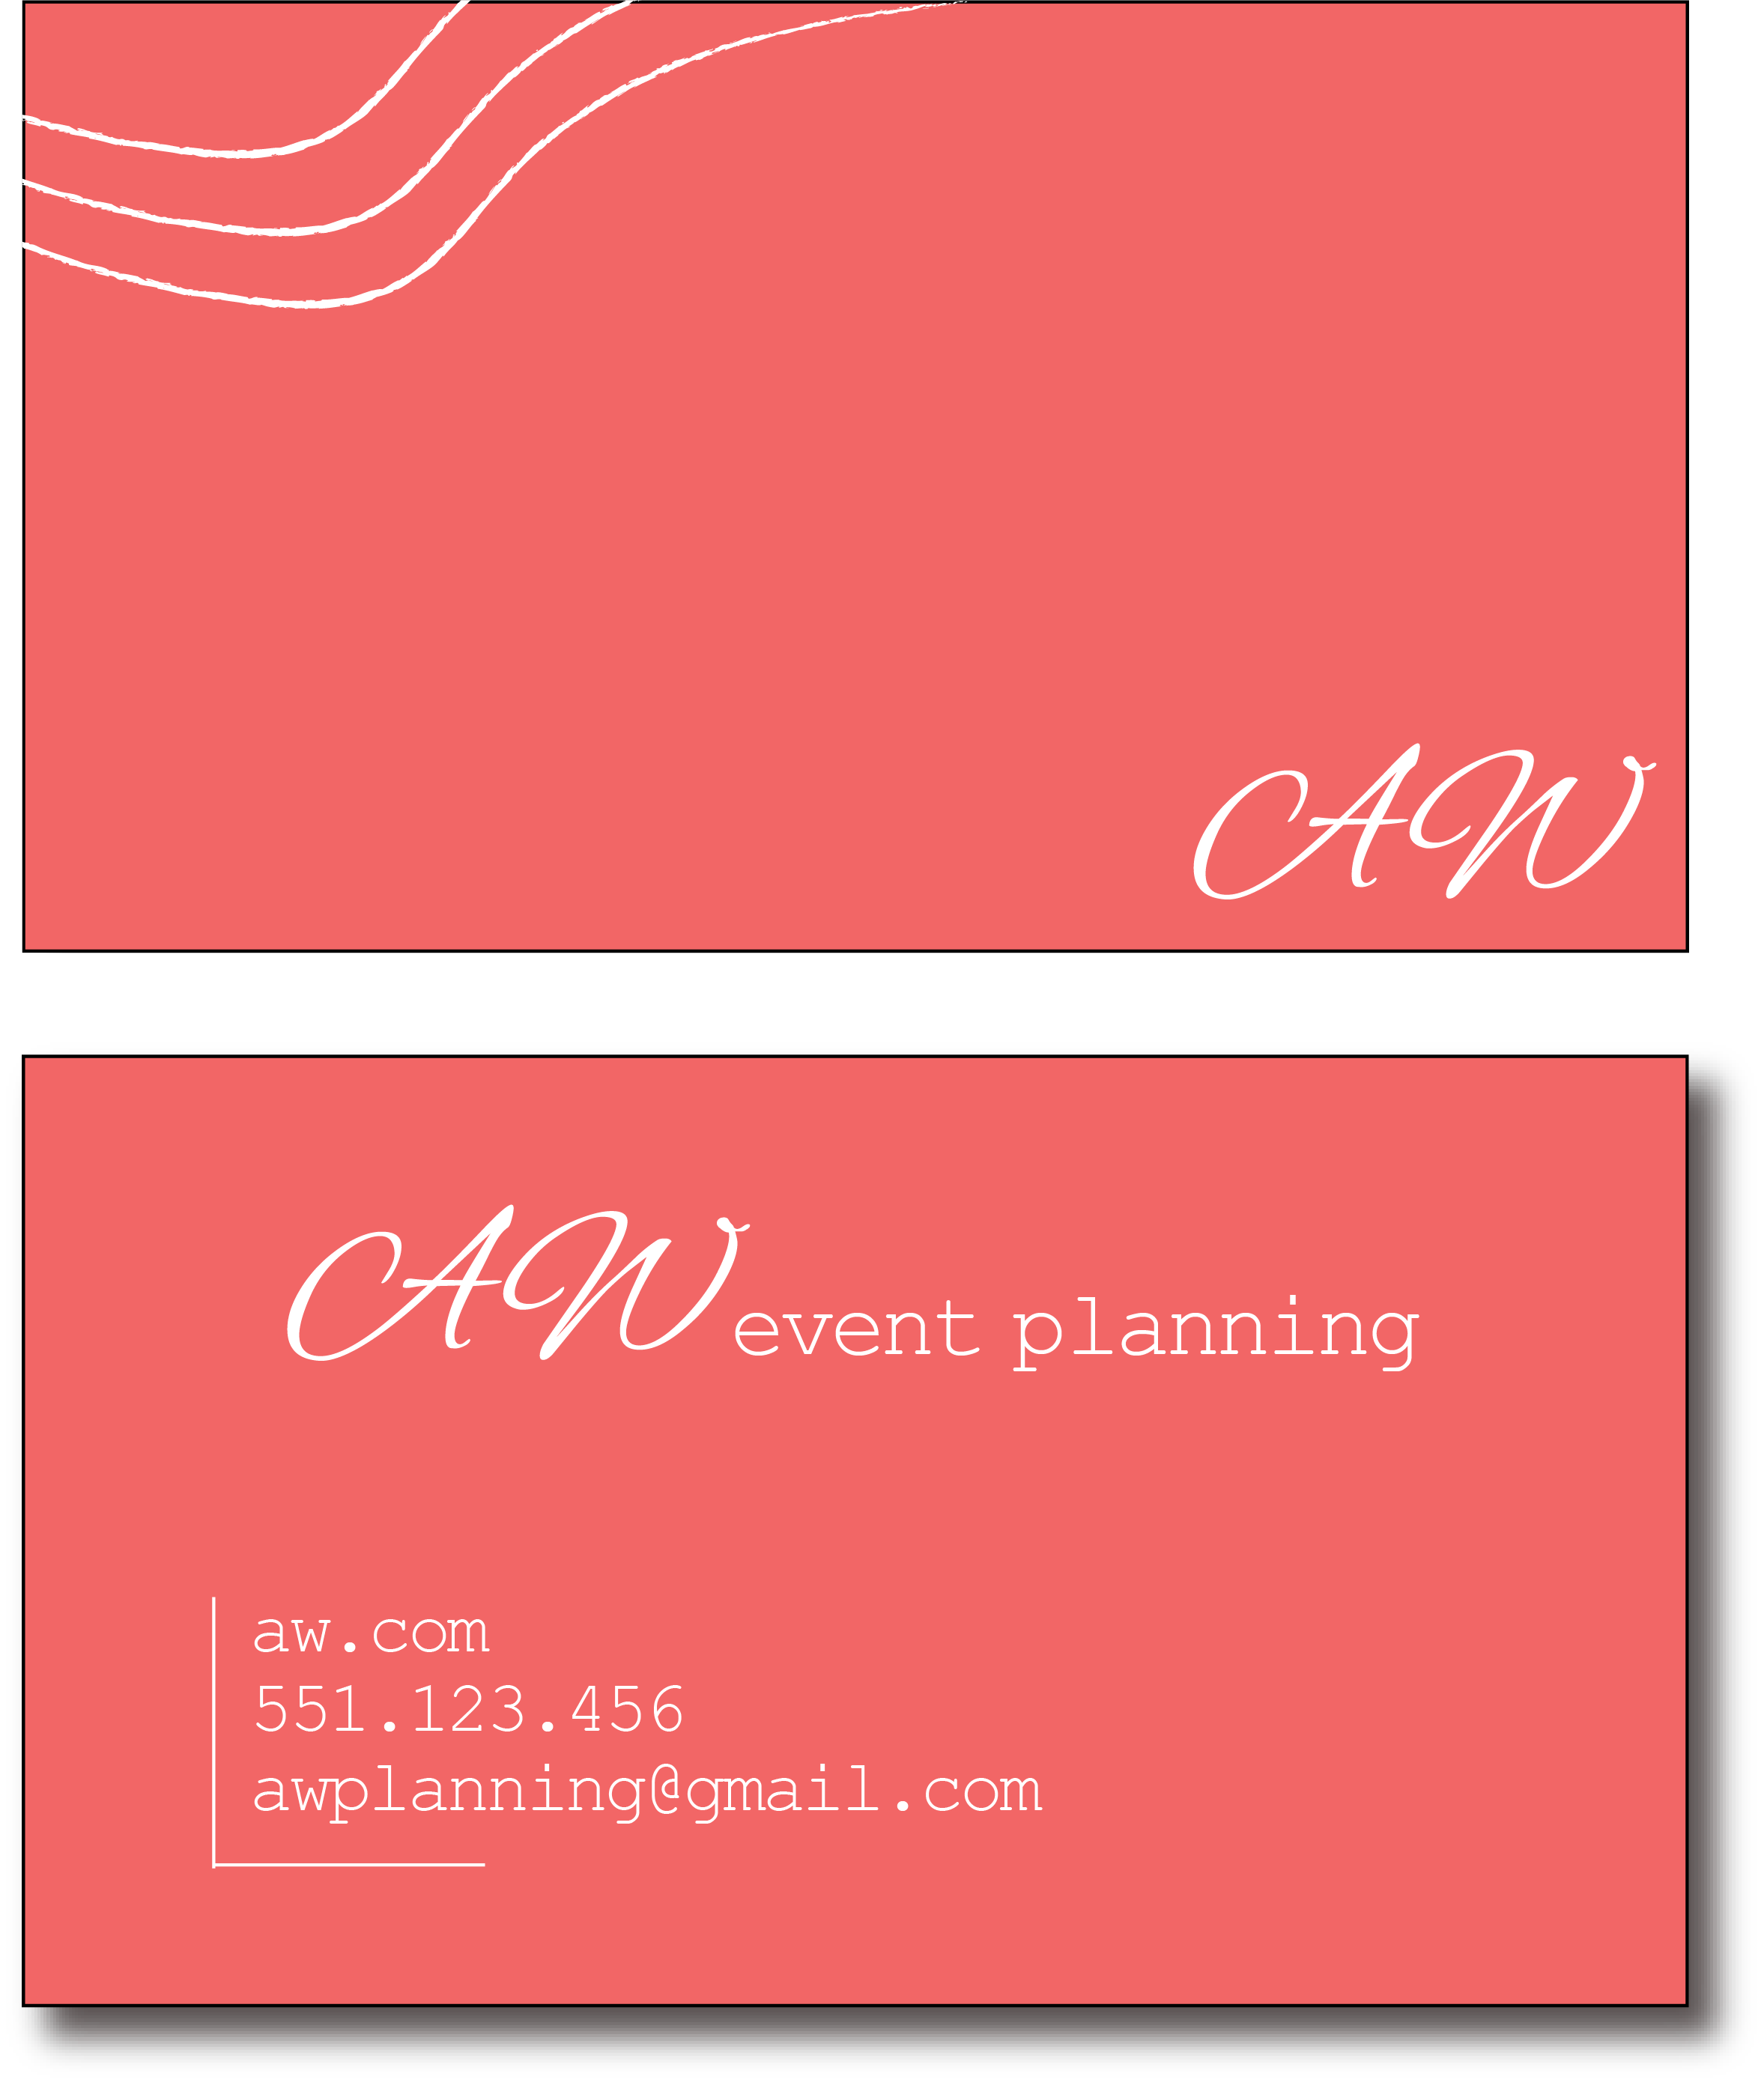 Simple red design business card